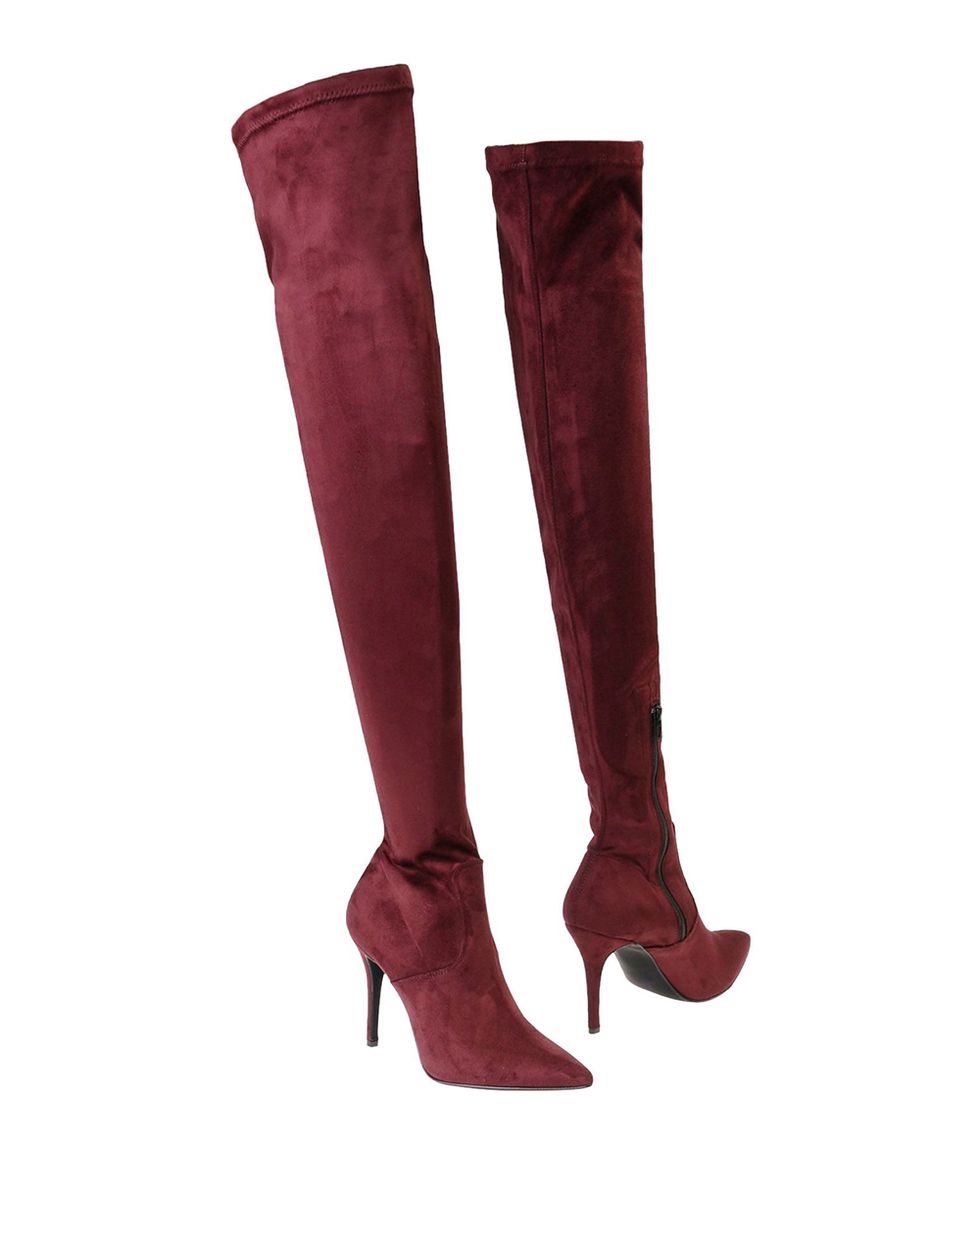 Footwear, Boot, Knee-high boot, Maroon, Brown, Shoe, Suede, Leather, Leg, Costume accessory, 